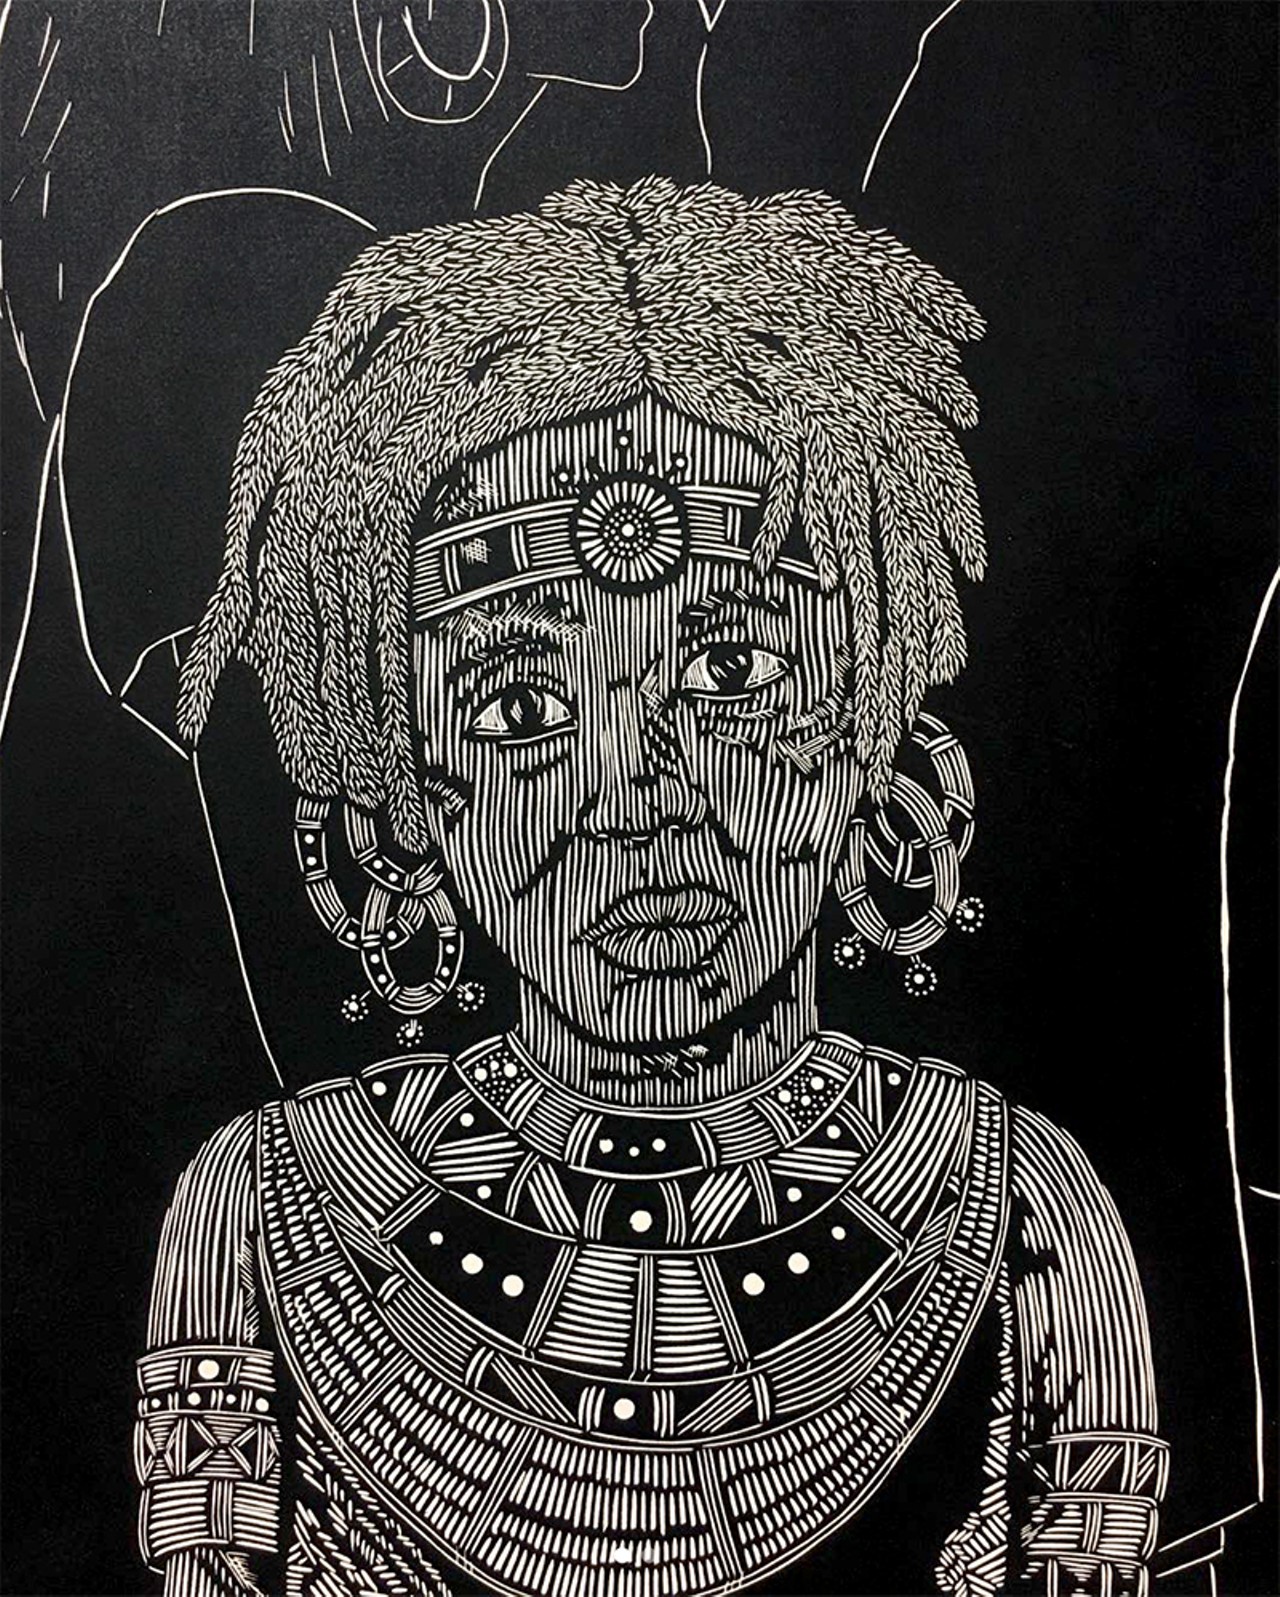 See Omar Richardson&#146;s prints at HCC Dale Mabry&#146;s Gallery 221 in TampaArtist lecture at 6 p.m. Reception Feb. 28, 5-8 p.m.
Photo via Instagram @gallery221hcc